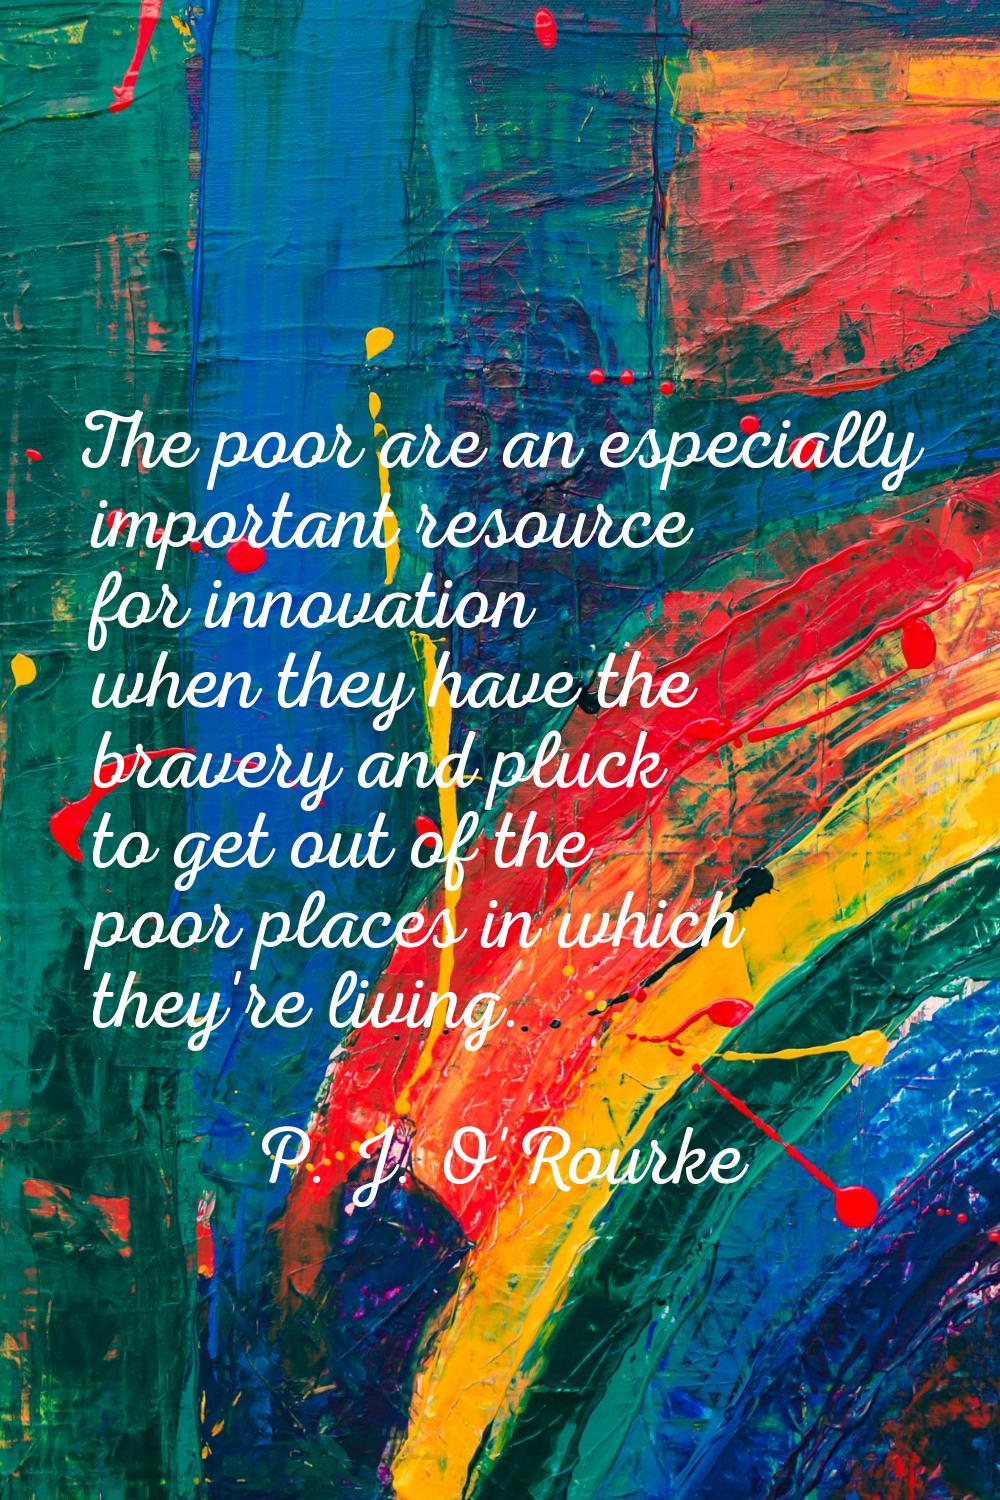 The poor are an especially important resource for innovation when they have the bravery and pluck t